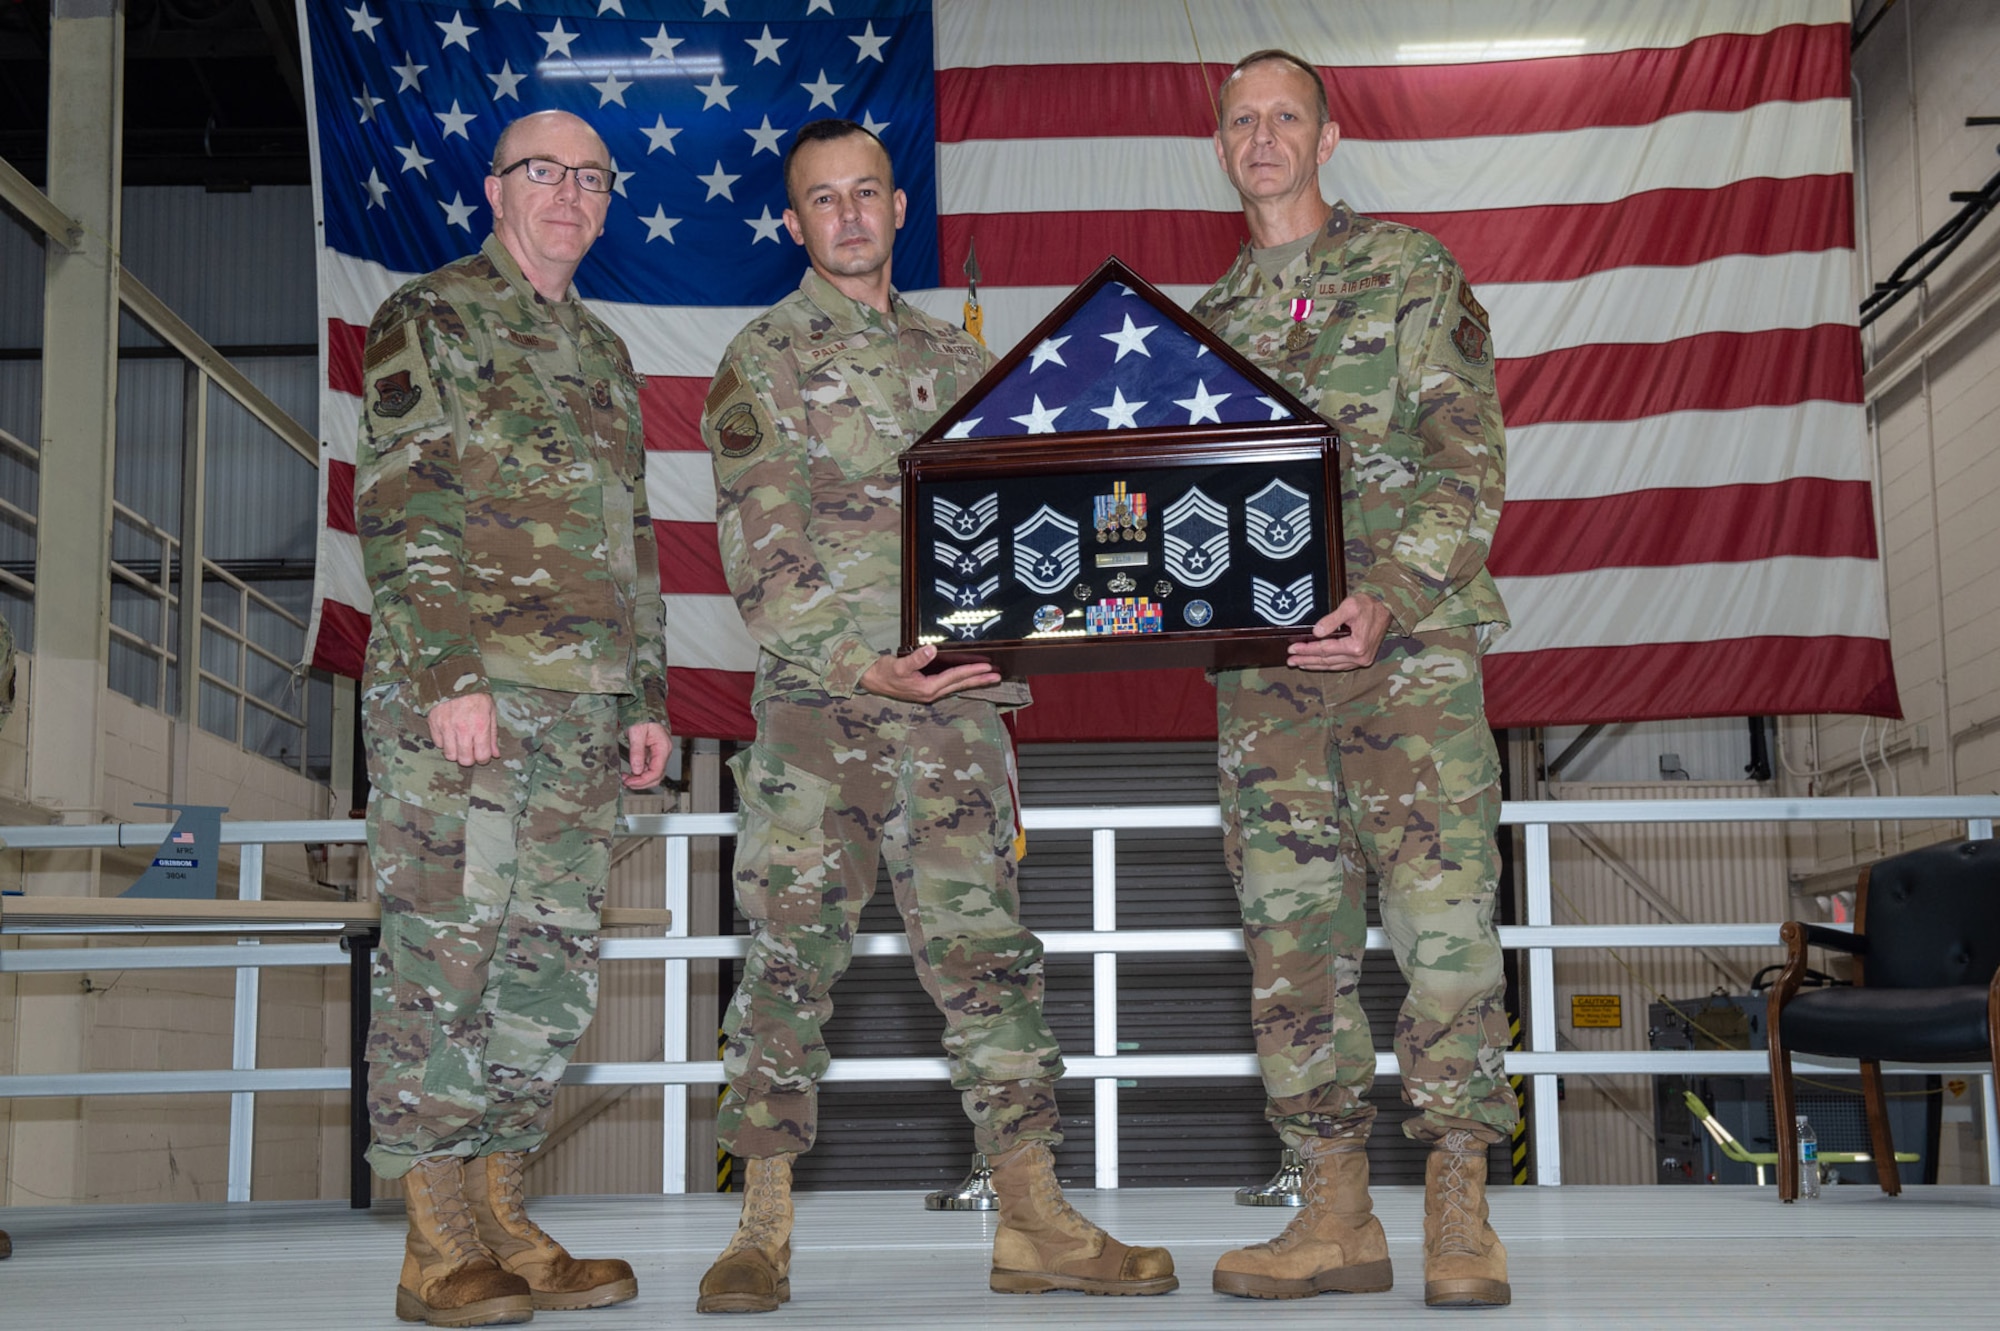 Chief Master Sgt. James Billing, 434th Maintenance Squadron superintendent and Maj. Brad Palm, 434th Maintenance Squadron commander, present Chief Master Sgt. Christopher Feltis, 434th Maintenance Squadron assistant senior enlisted leader, with a shadow box during his retirement ceremony at Grissom Air Reserve Base, Ind. on Sept 11, 2022. Feltis’ retirement was effective Apr. 28, 2022 with more than 32 years of service. (U.S. Air Force photo by Staff Sgt. Alexis Culbert)